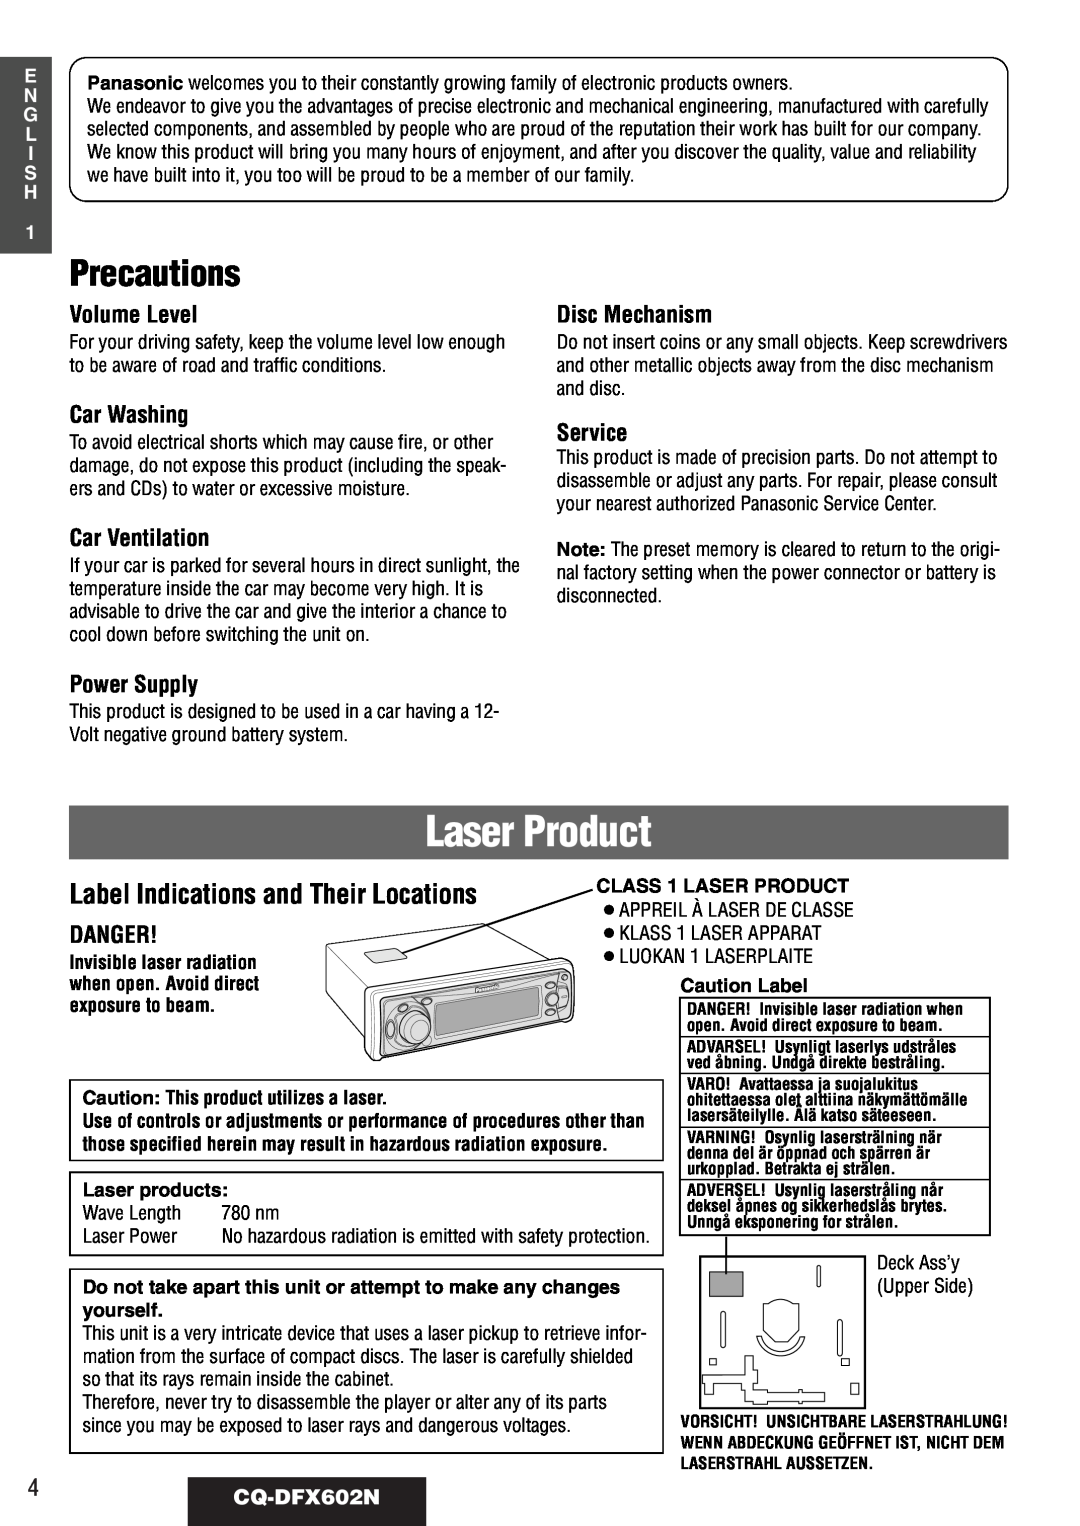 Panasonic CQ-DFX602N Precautions, Label Indications and Their Locations, Volume Level, Disc Mechanism, Car Washing, Danger 